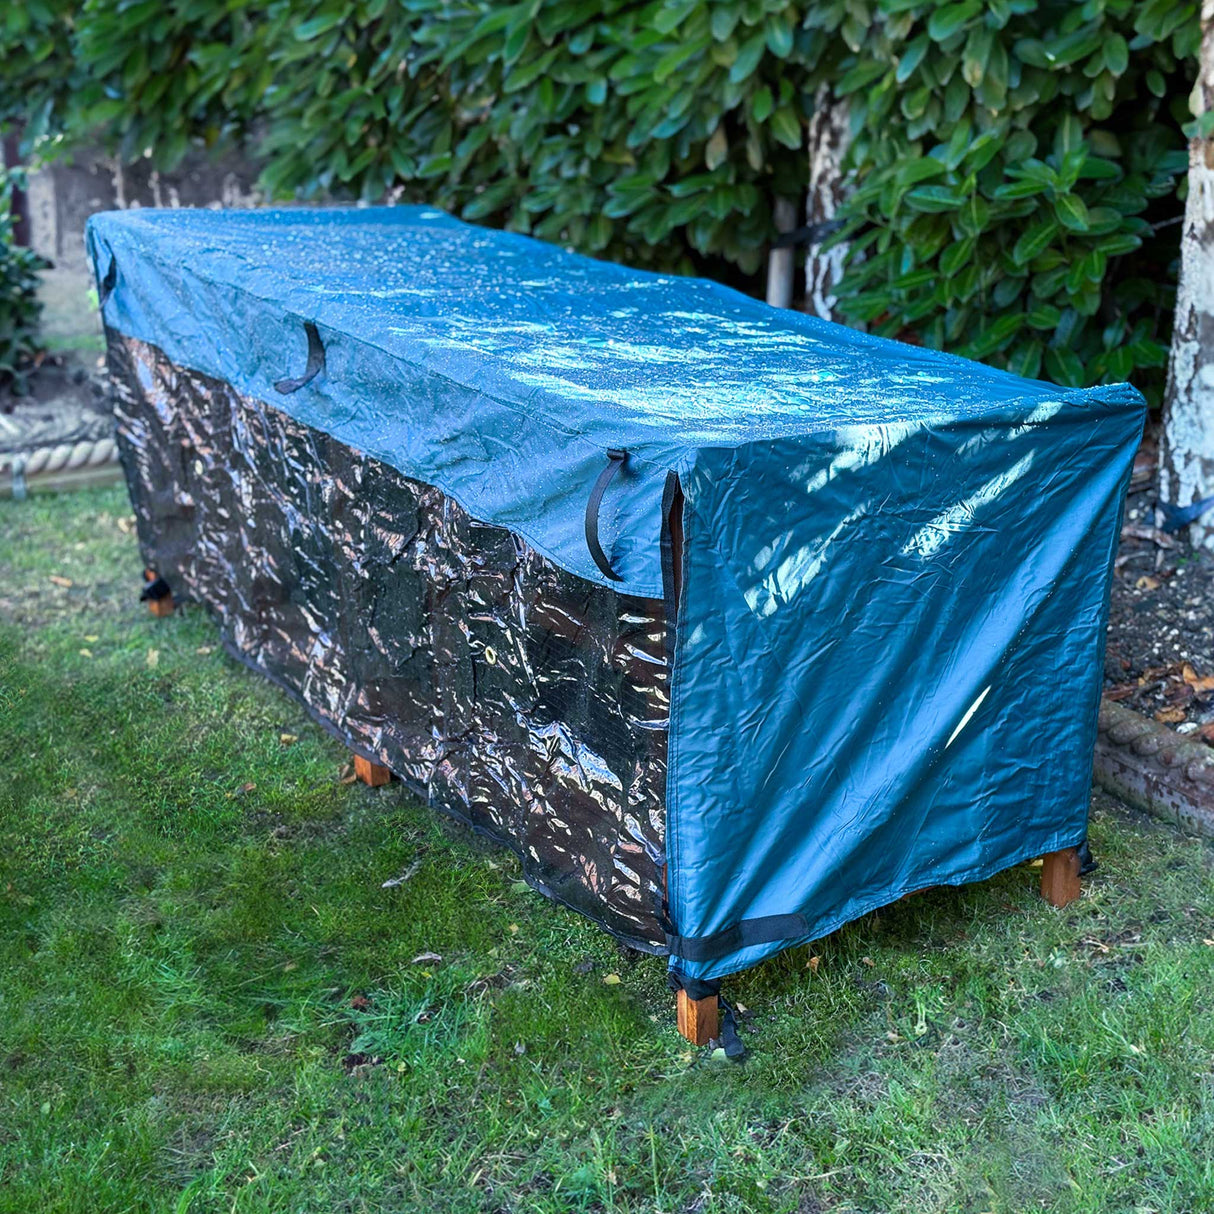 5ft Chartwell Single Rabbit Hutch Cover | Protect Your Hutch From The Weather With Day Dry™ Rain Covers